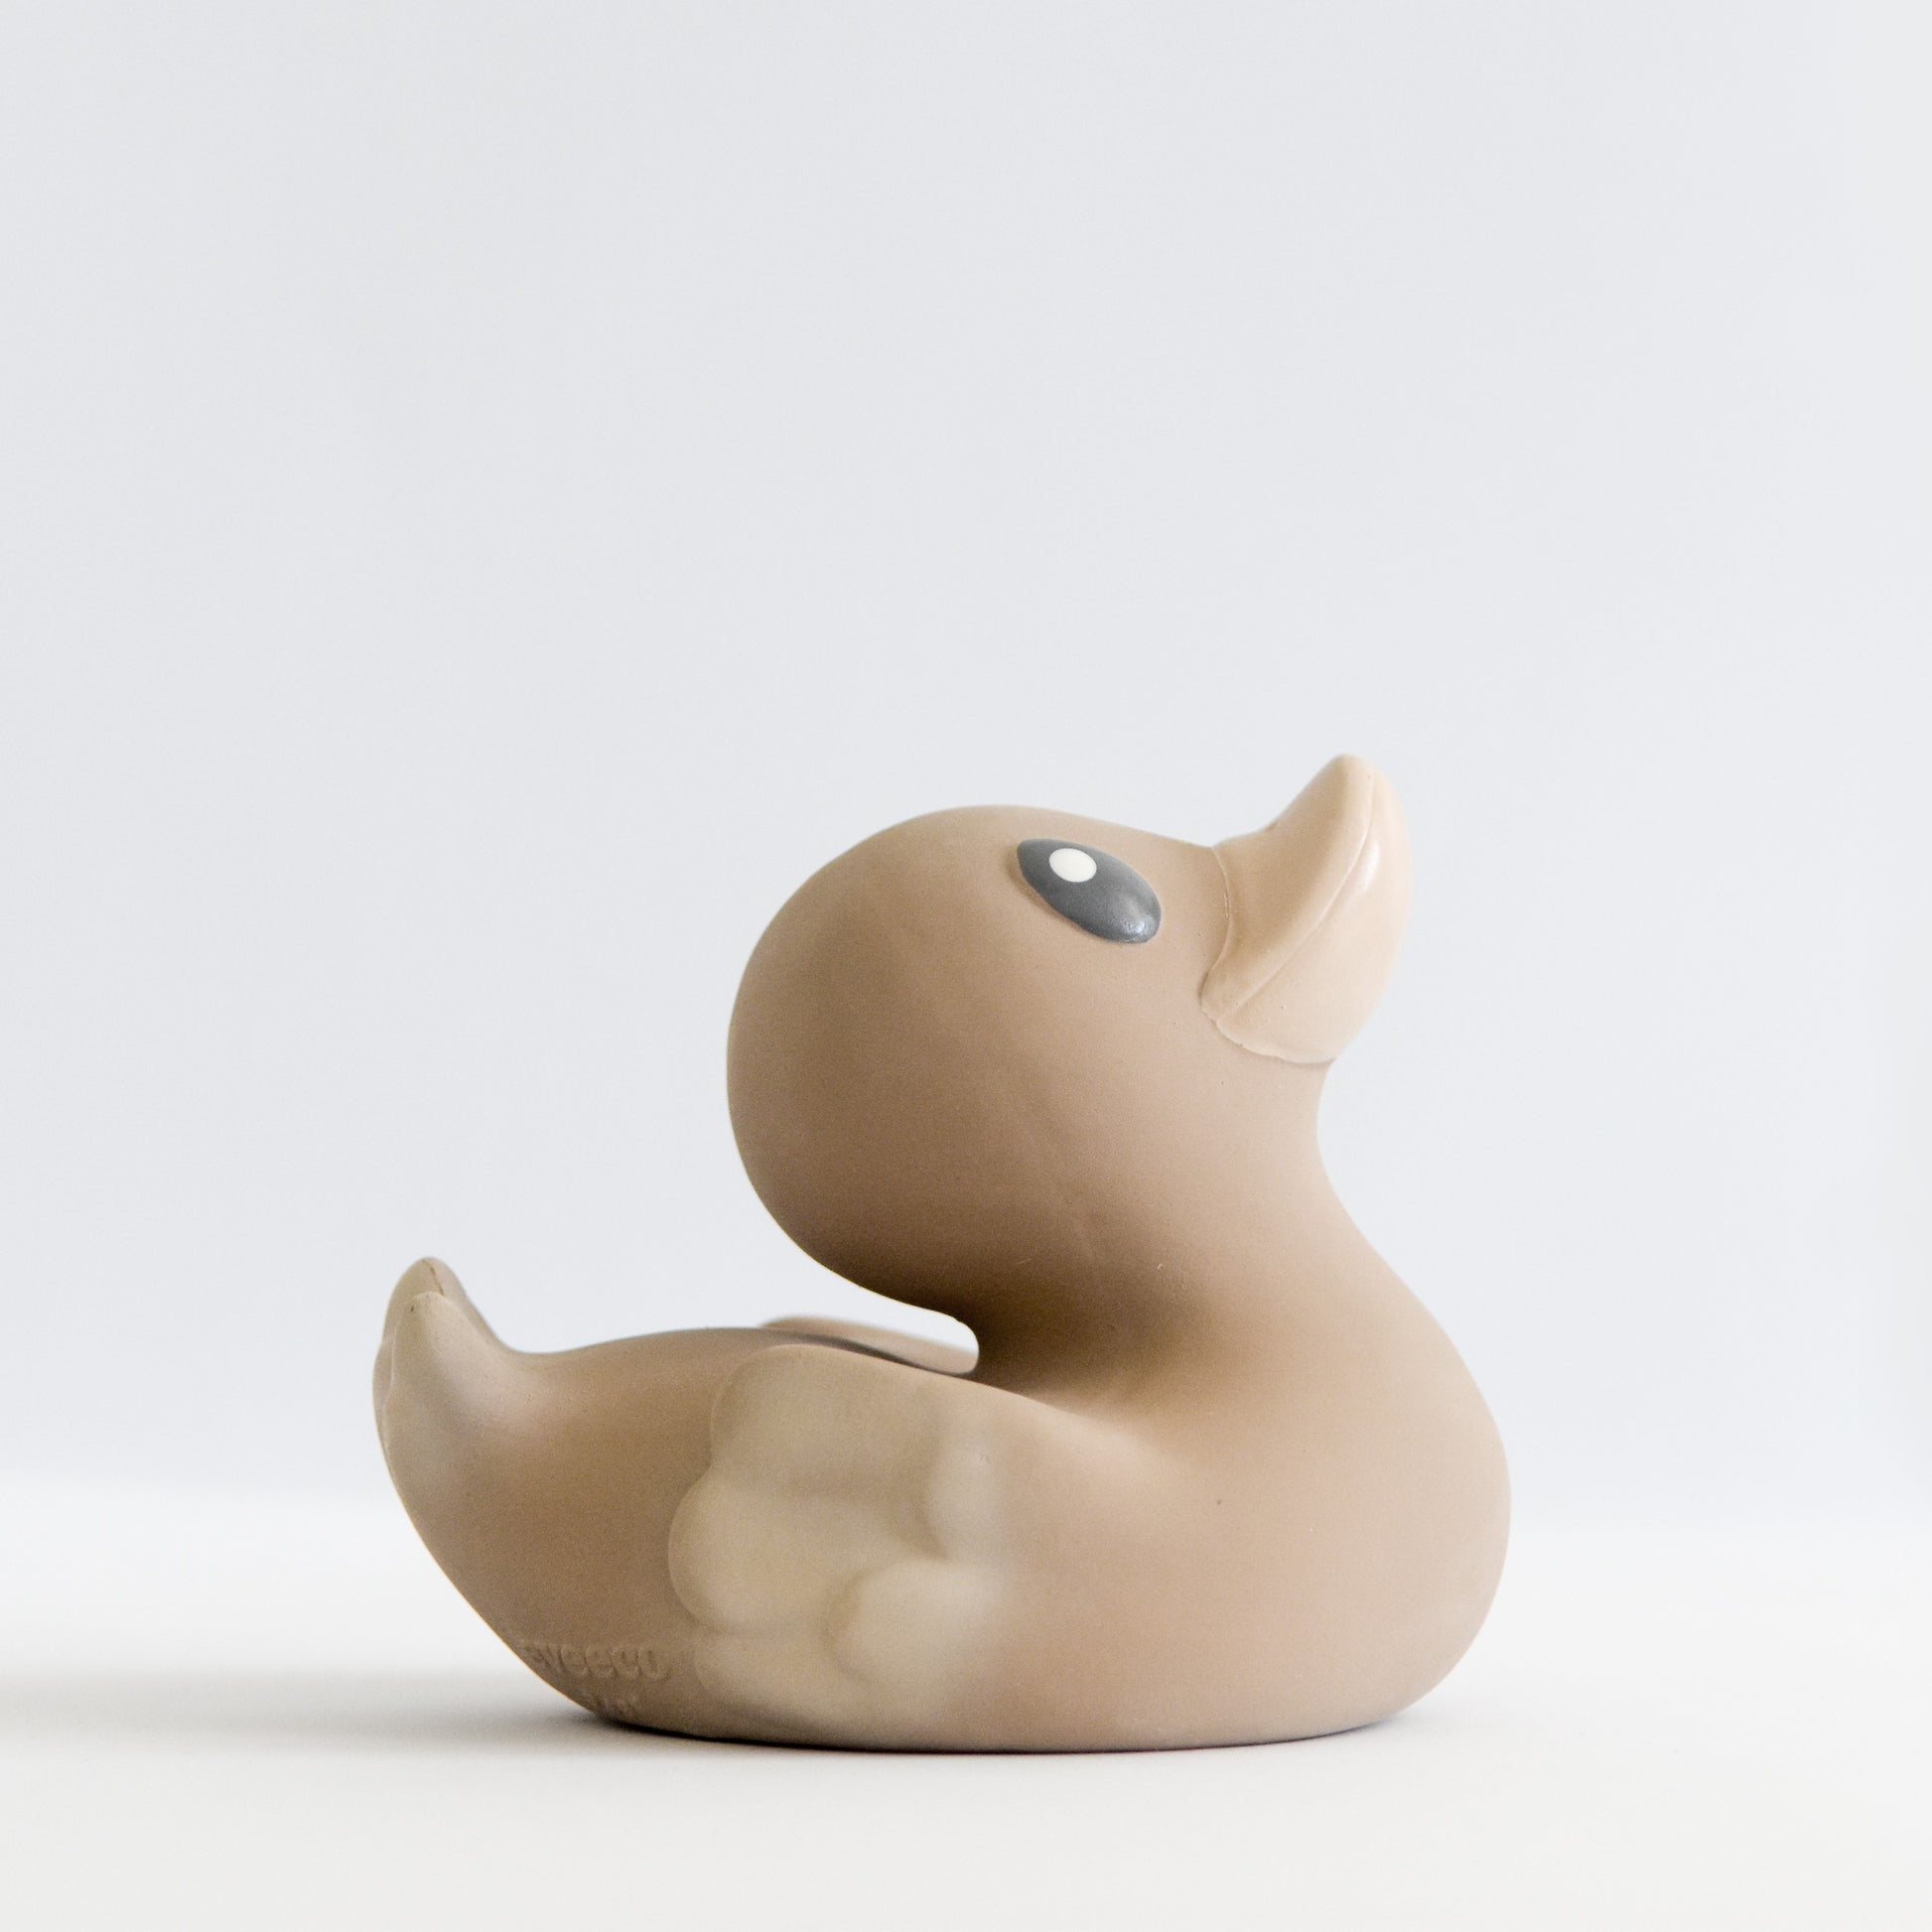 side view of an adorable natural rubber bath toy duck in a chocolate colour